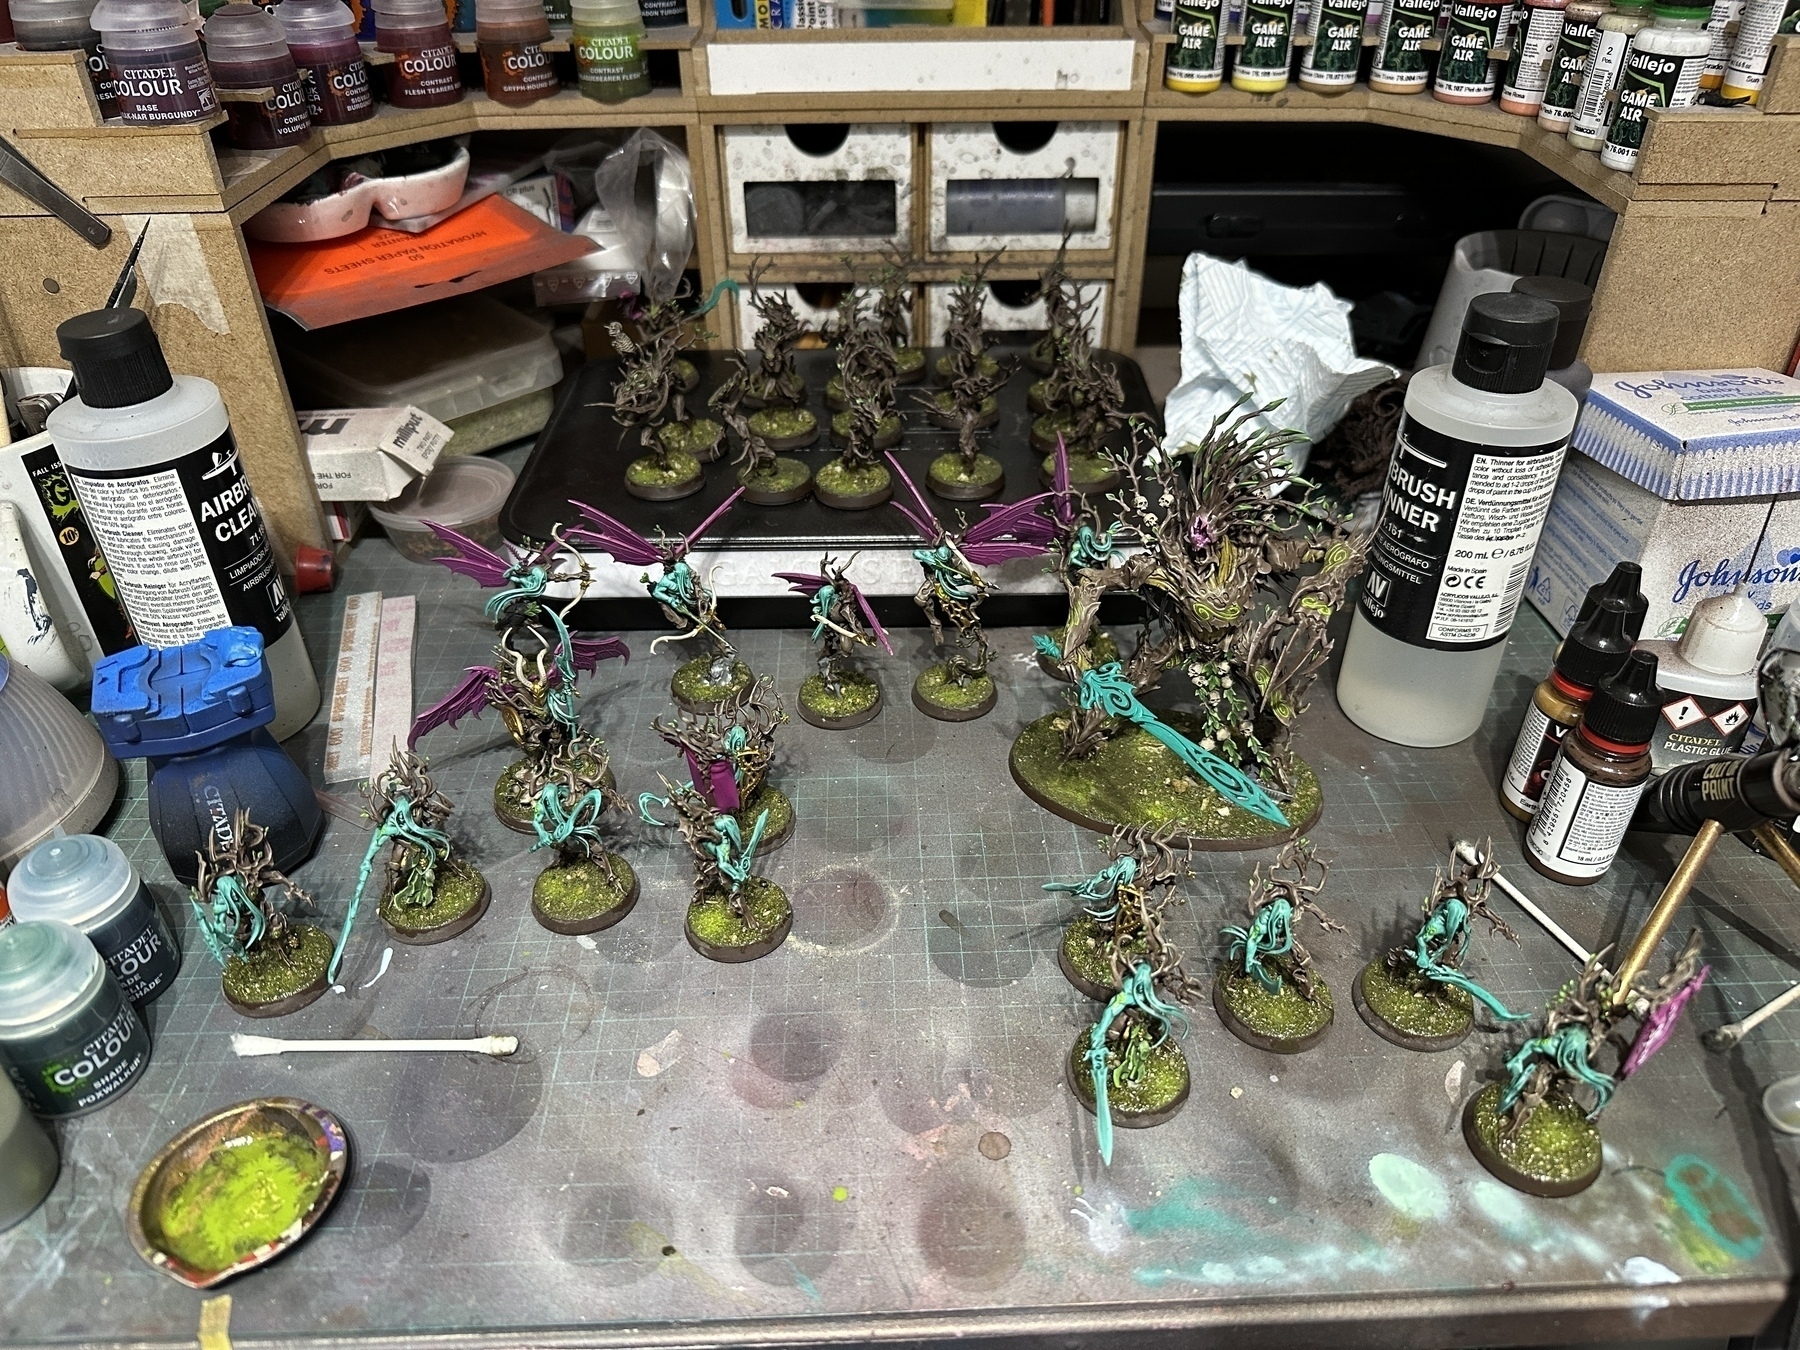 A collection of mostly painted miniatures from the Sylvaneth faction of Age of Sigmar, on a messy desk. The primary colours are woody browns, cold jade greens, warm forest greens, plus some magenta/pinks and gold as “spot” colours